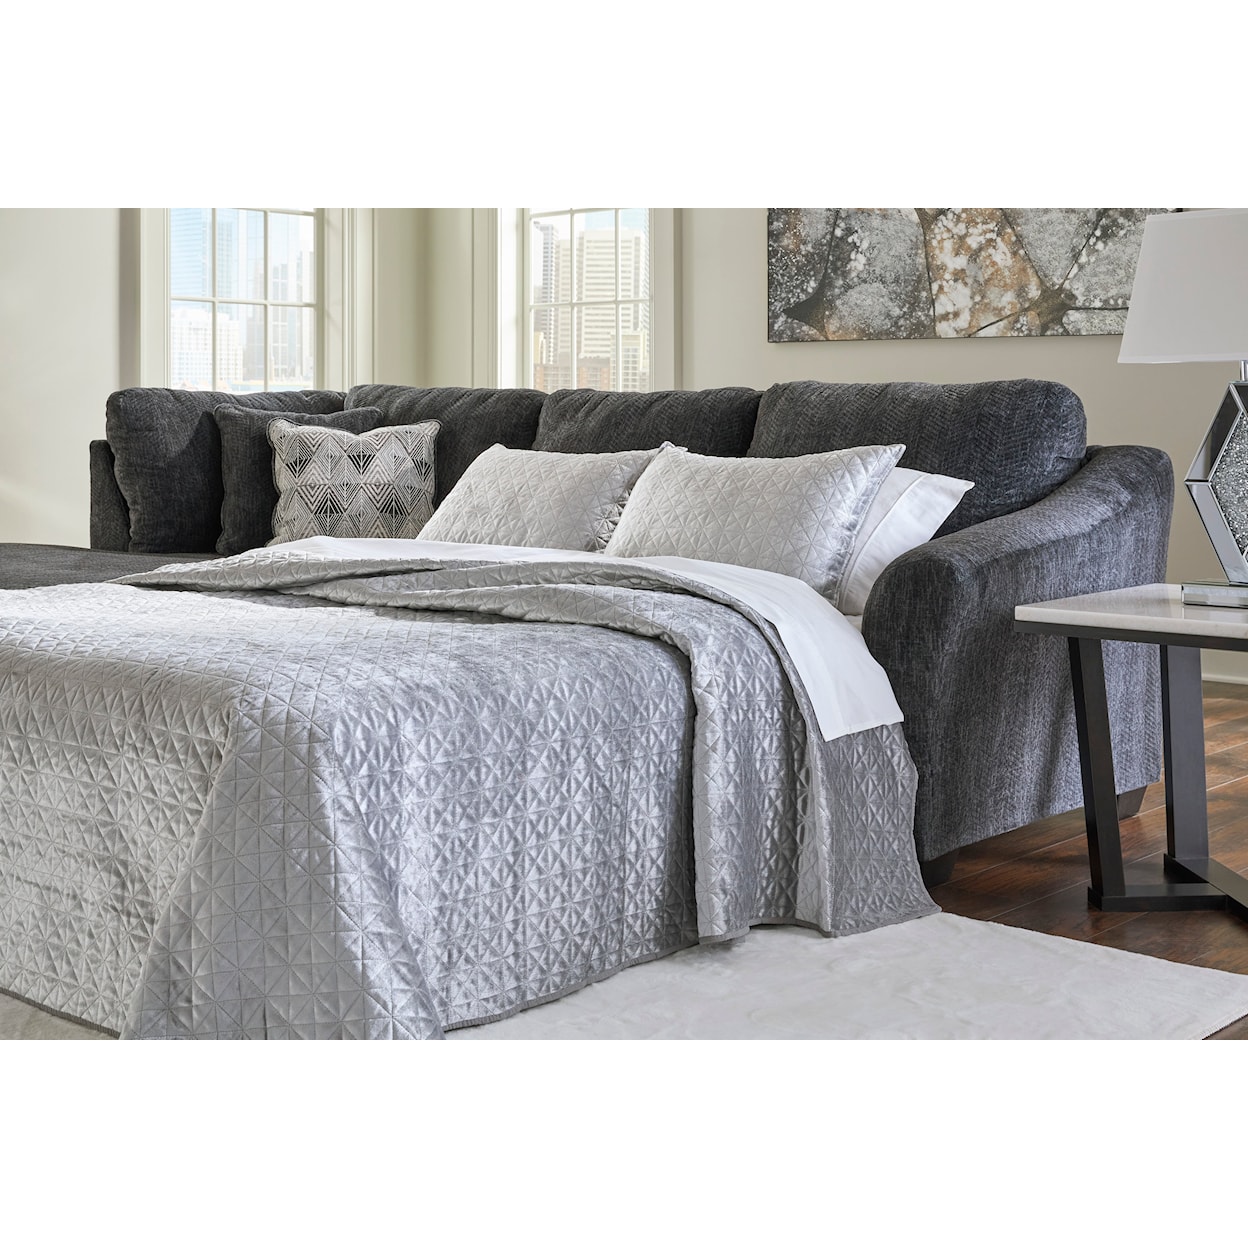 Signature Design by Ashley Biddeford 2-Piece Sleeper Sectional with Chaise